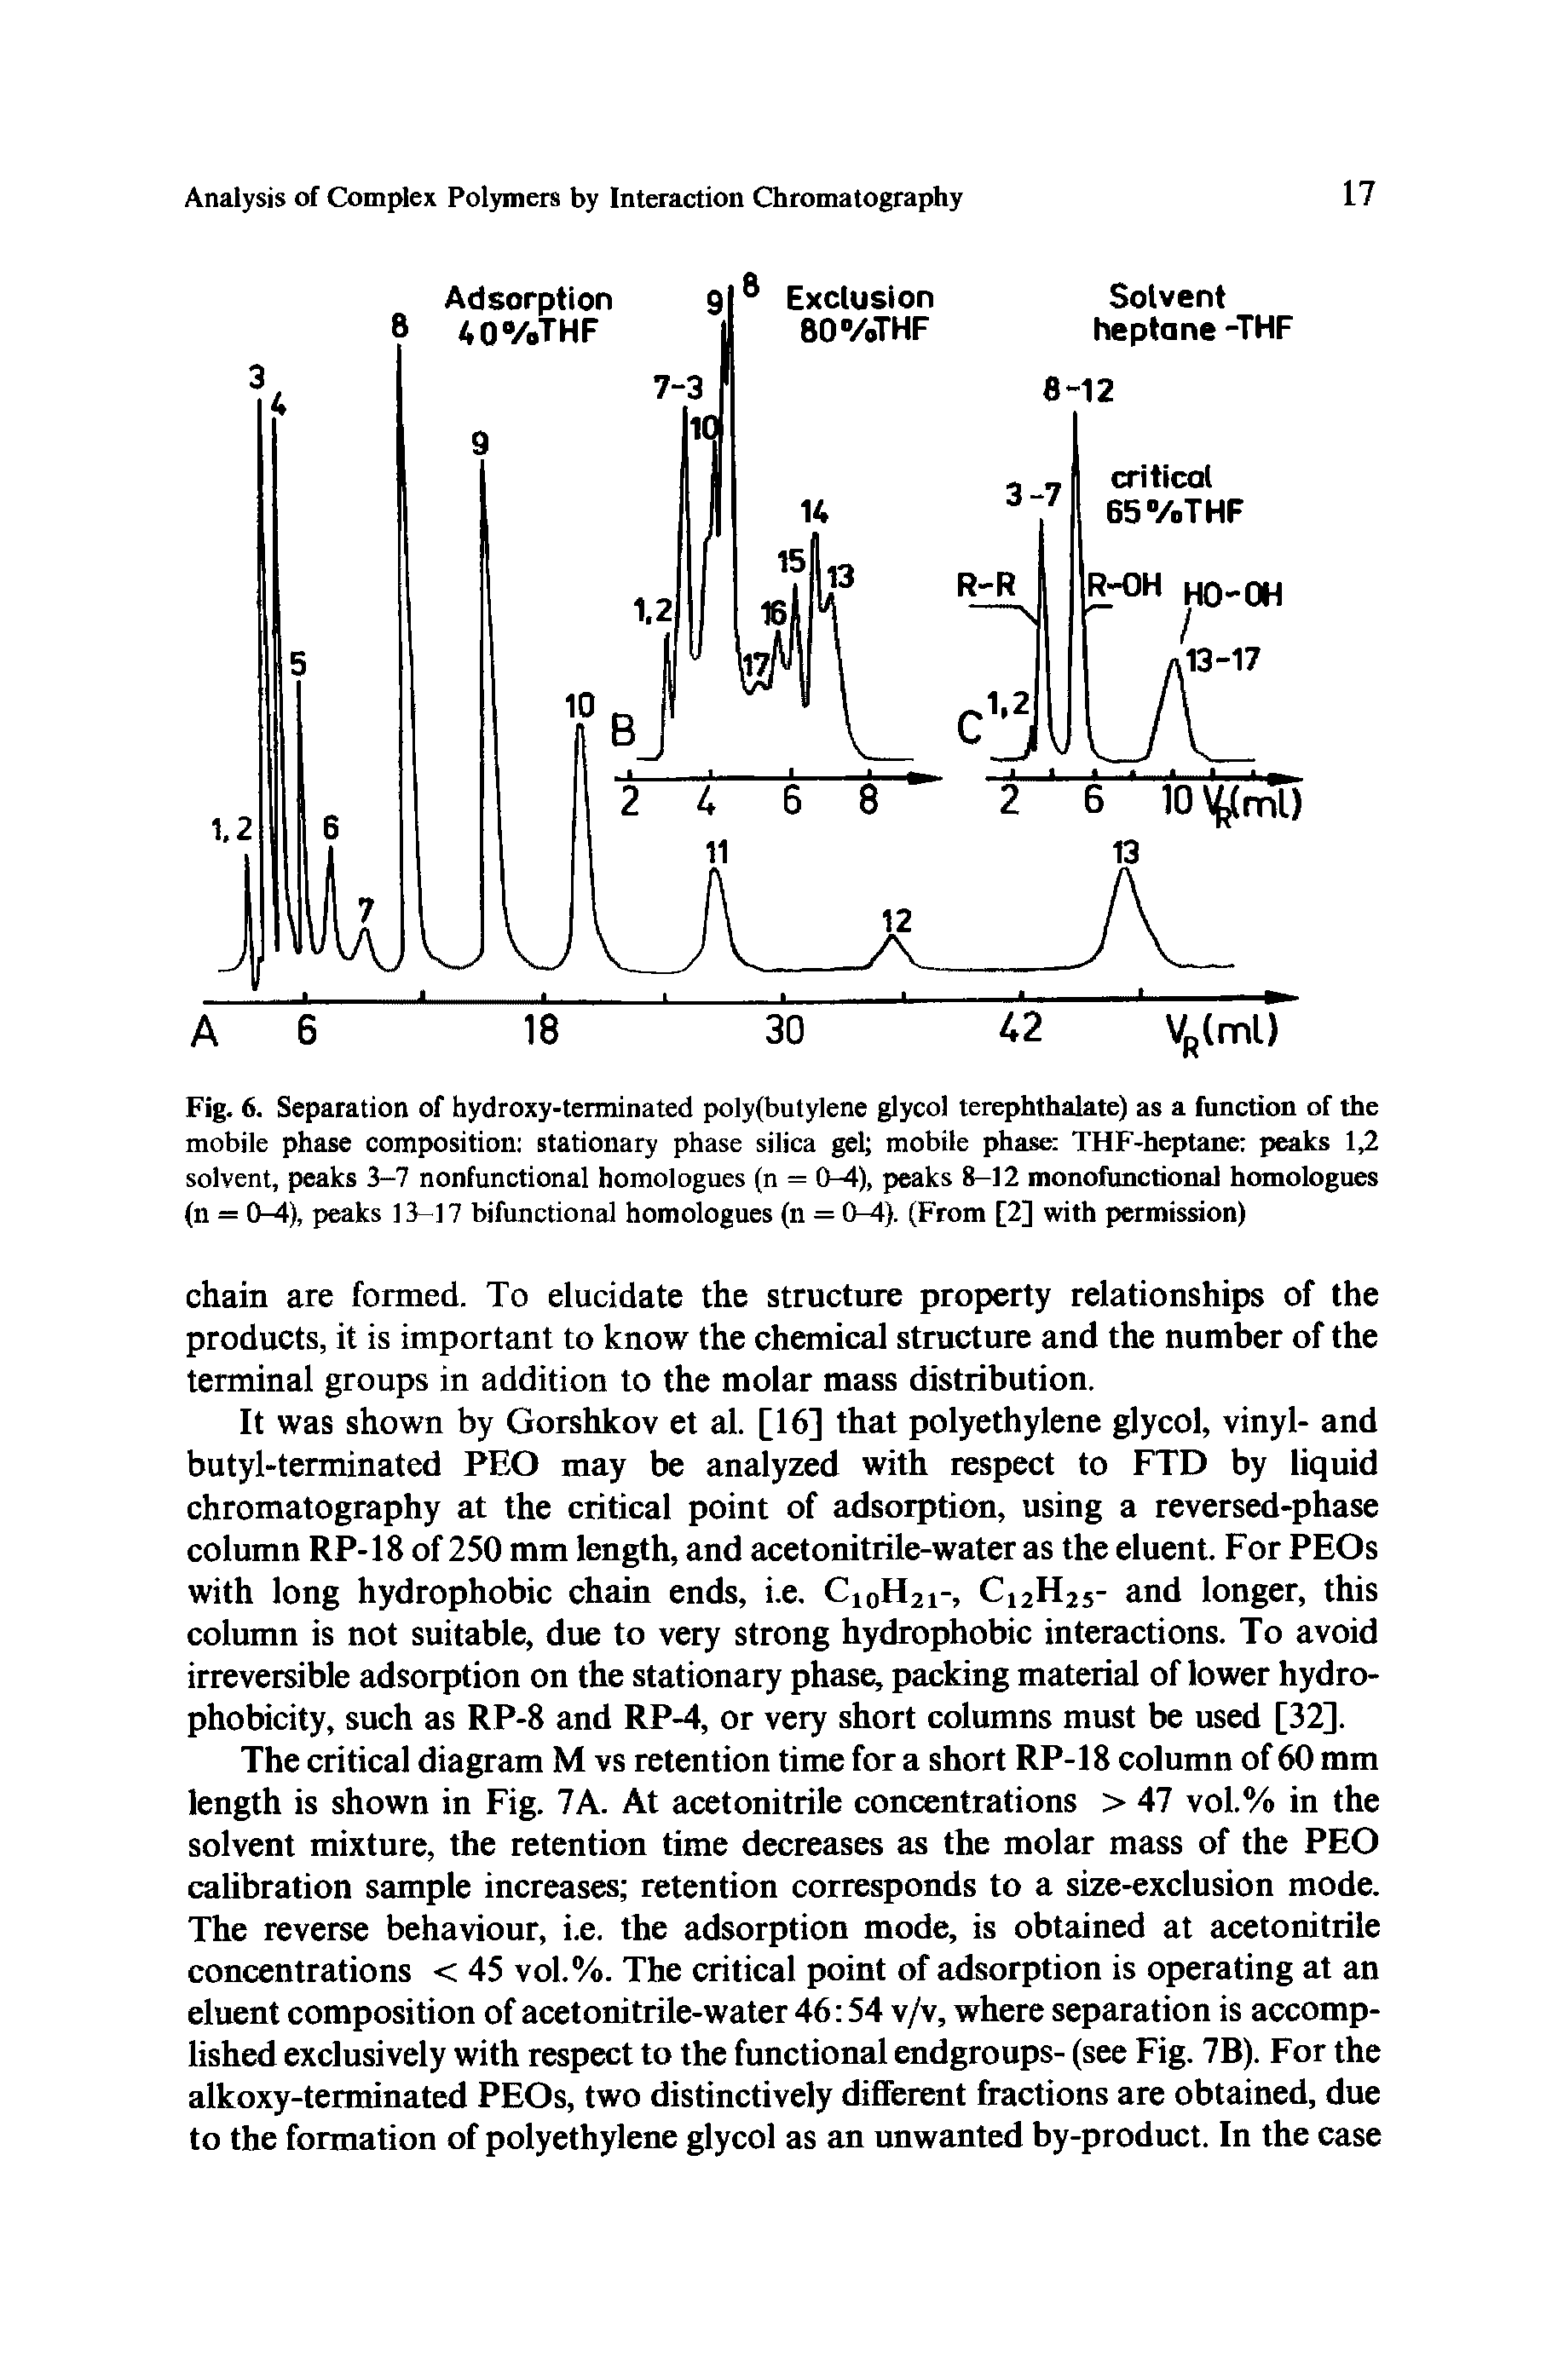 Fig. 6. Separation of hydroxy-terminated poly(butylene glycol terephthalate) as a function of the mobile phase composition stationary phase silica gel mobile phase THF-heptane peaks 1.2 solvent, peaks 3-7 nonfunctional homologues (n = 0-4), peaks 8-12 monofunctional homologues (n = 0-4), peaks 13-17 bifunctional homologues (n = 04). (From [2] with permission)...